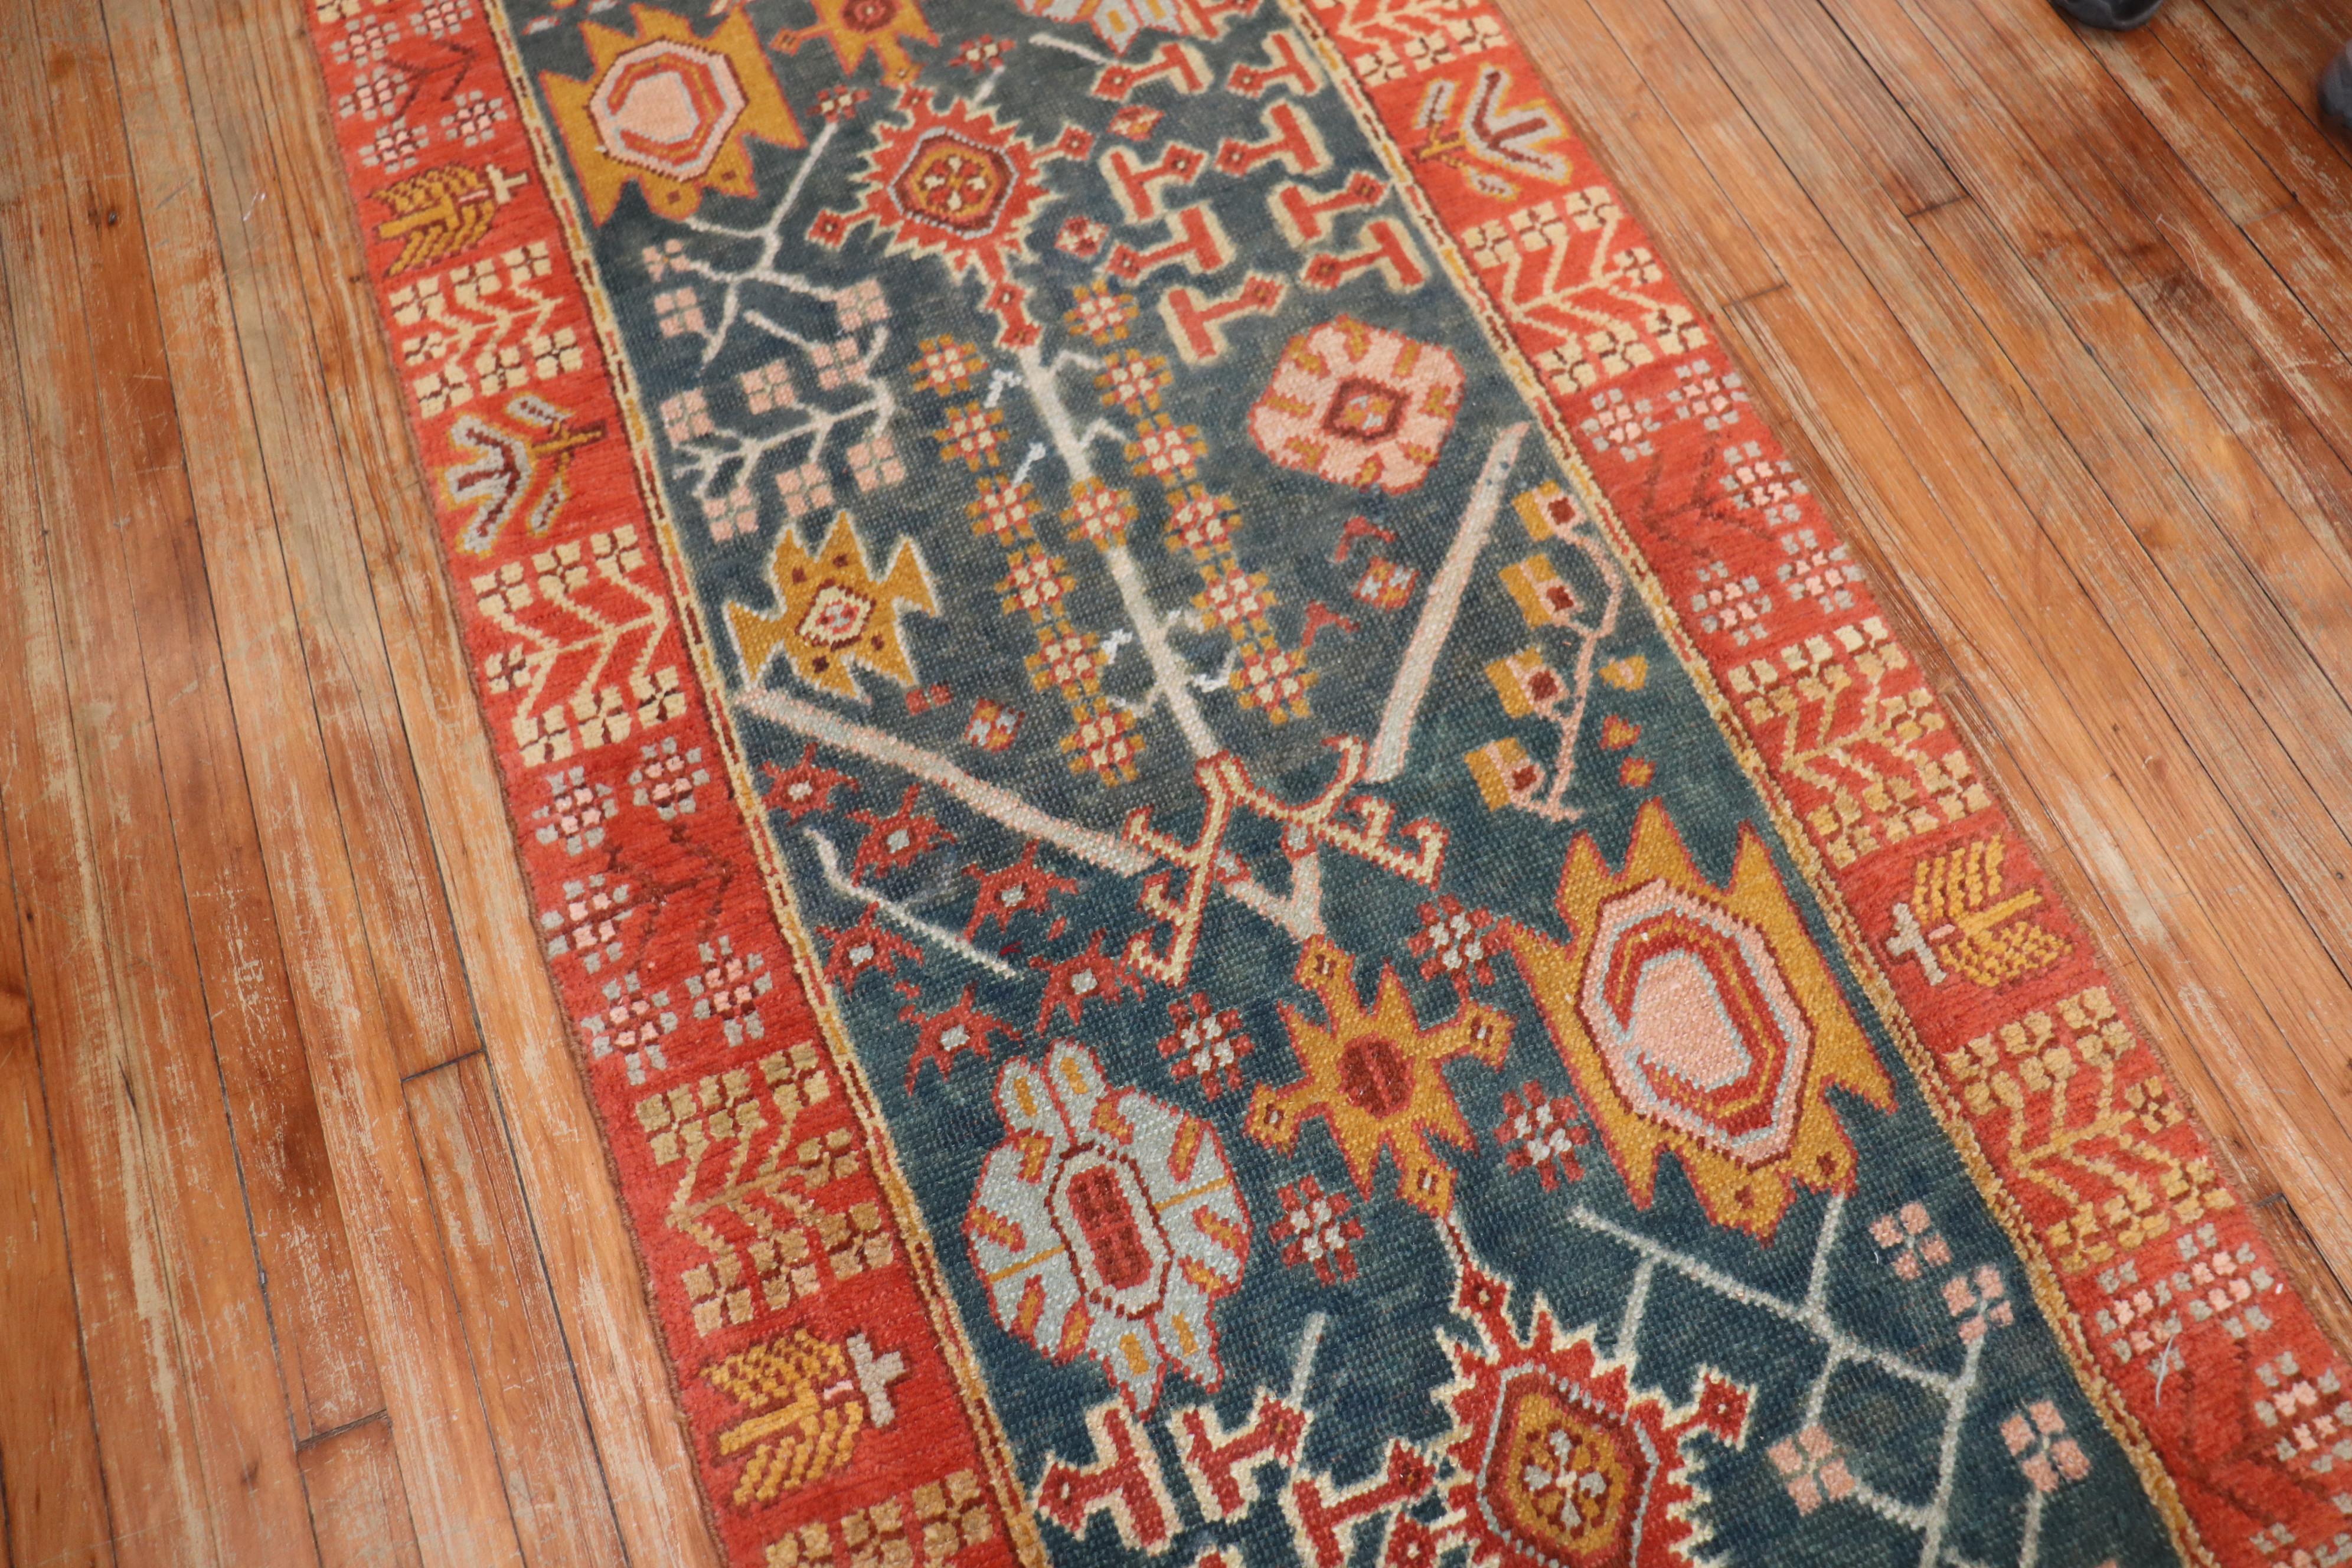 An early 20th-century antique Oushak runner in green and orangy red tones.

Measures: 3' x 15'.